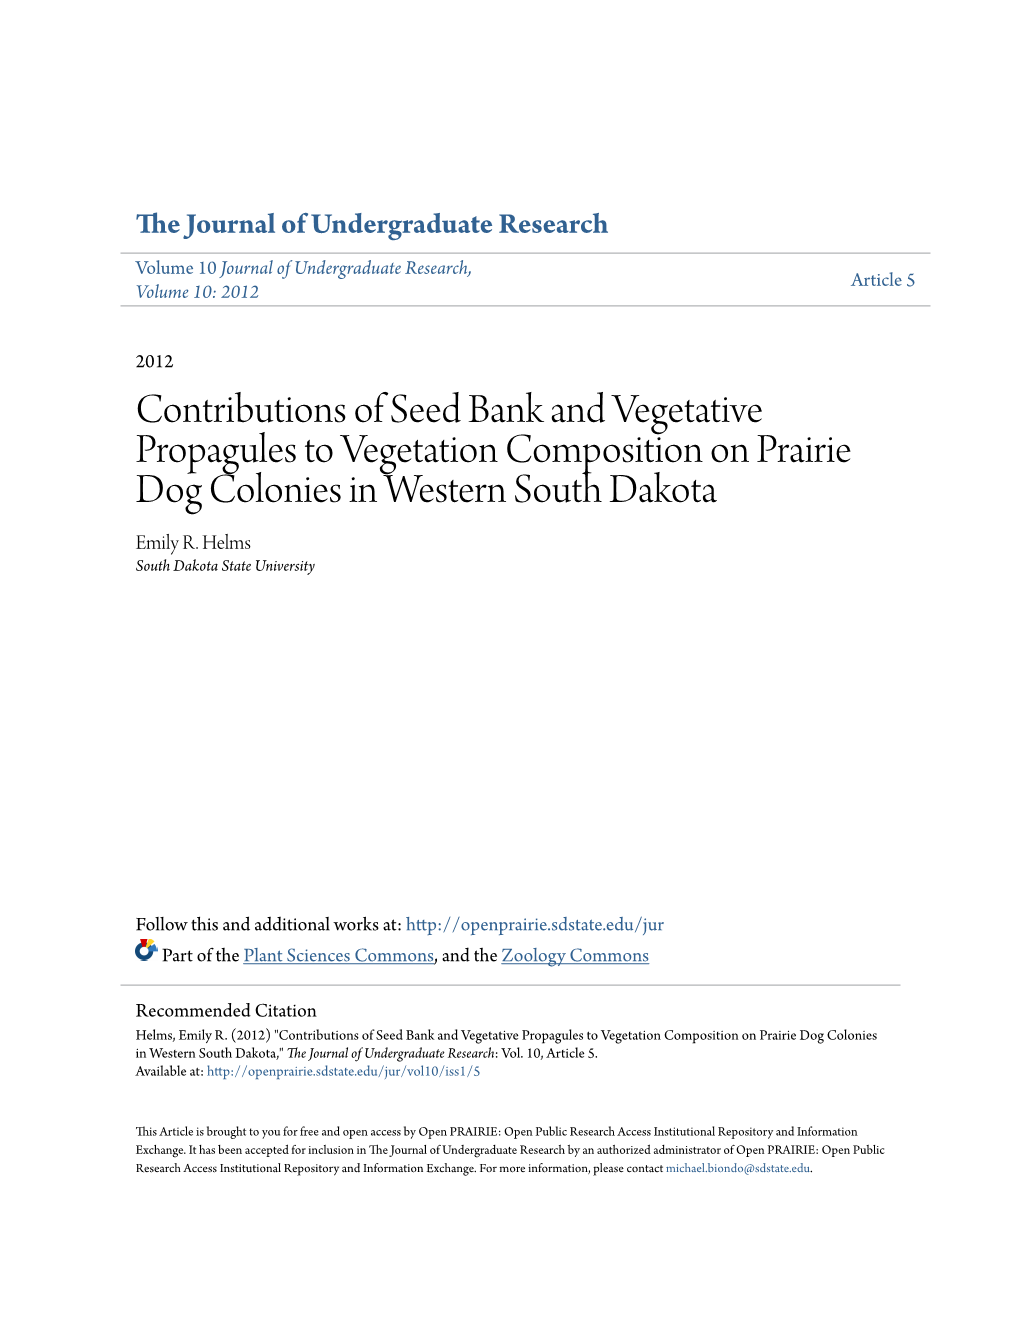 Contributions of Seed Bank and Vegetative Propagules to Vegetation Composition on Prairie Dog Colonies in Western South Dakota Emily R